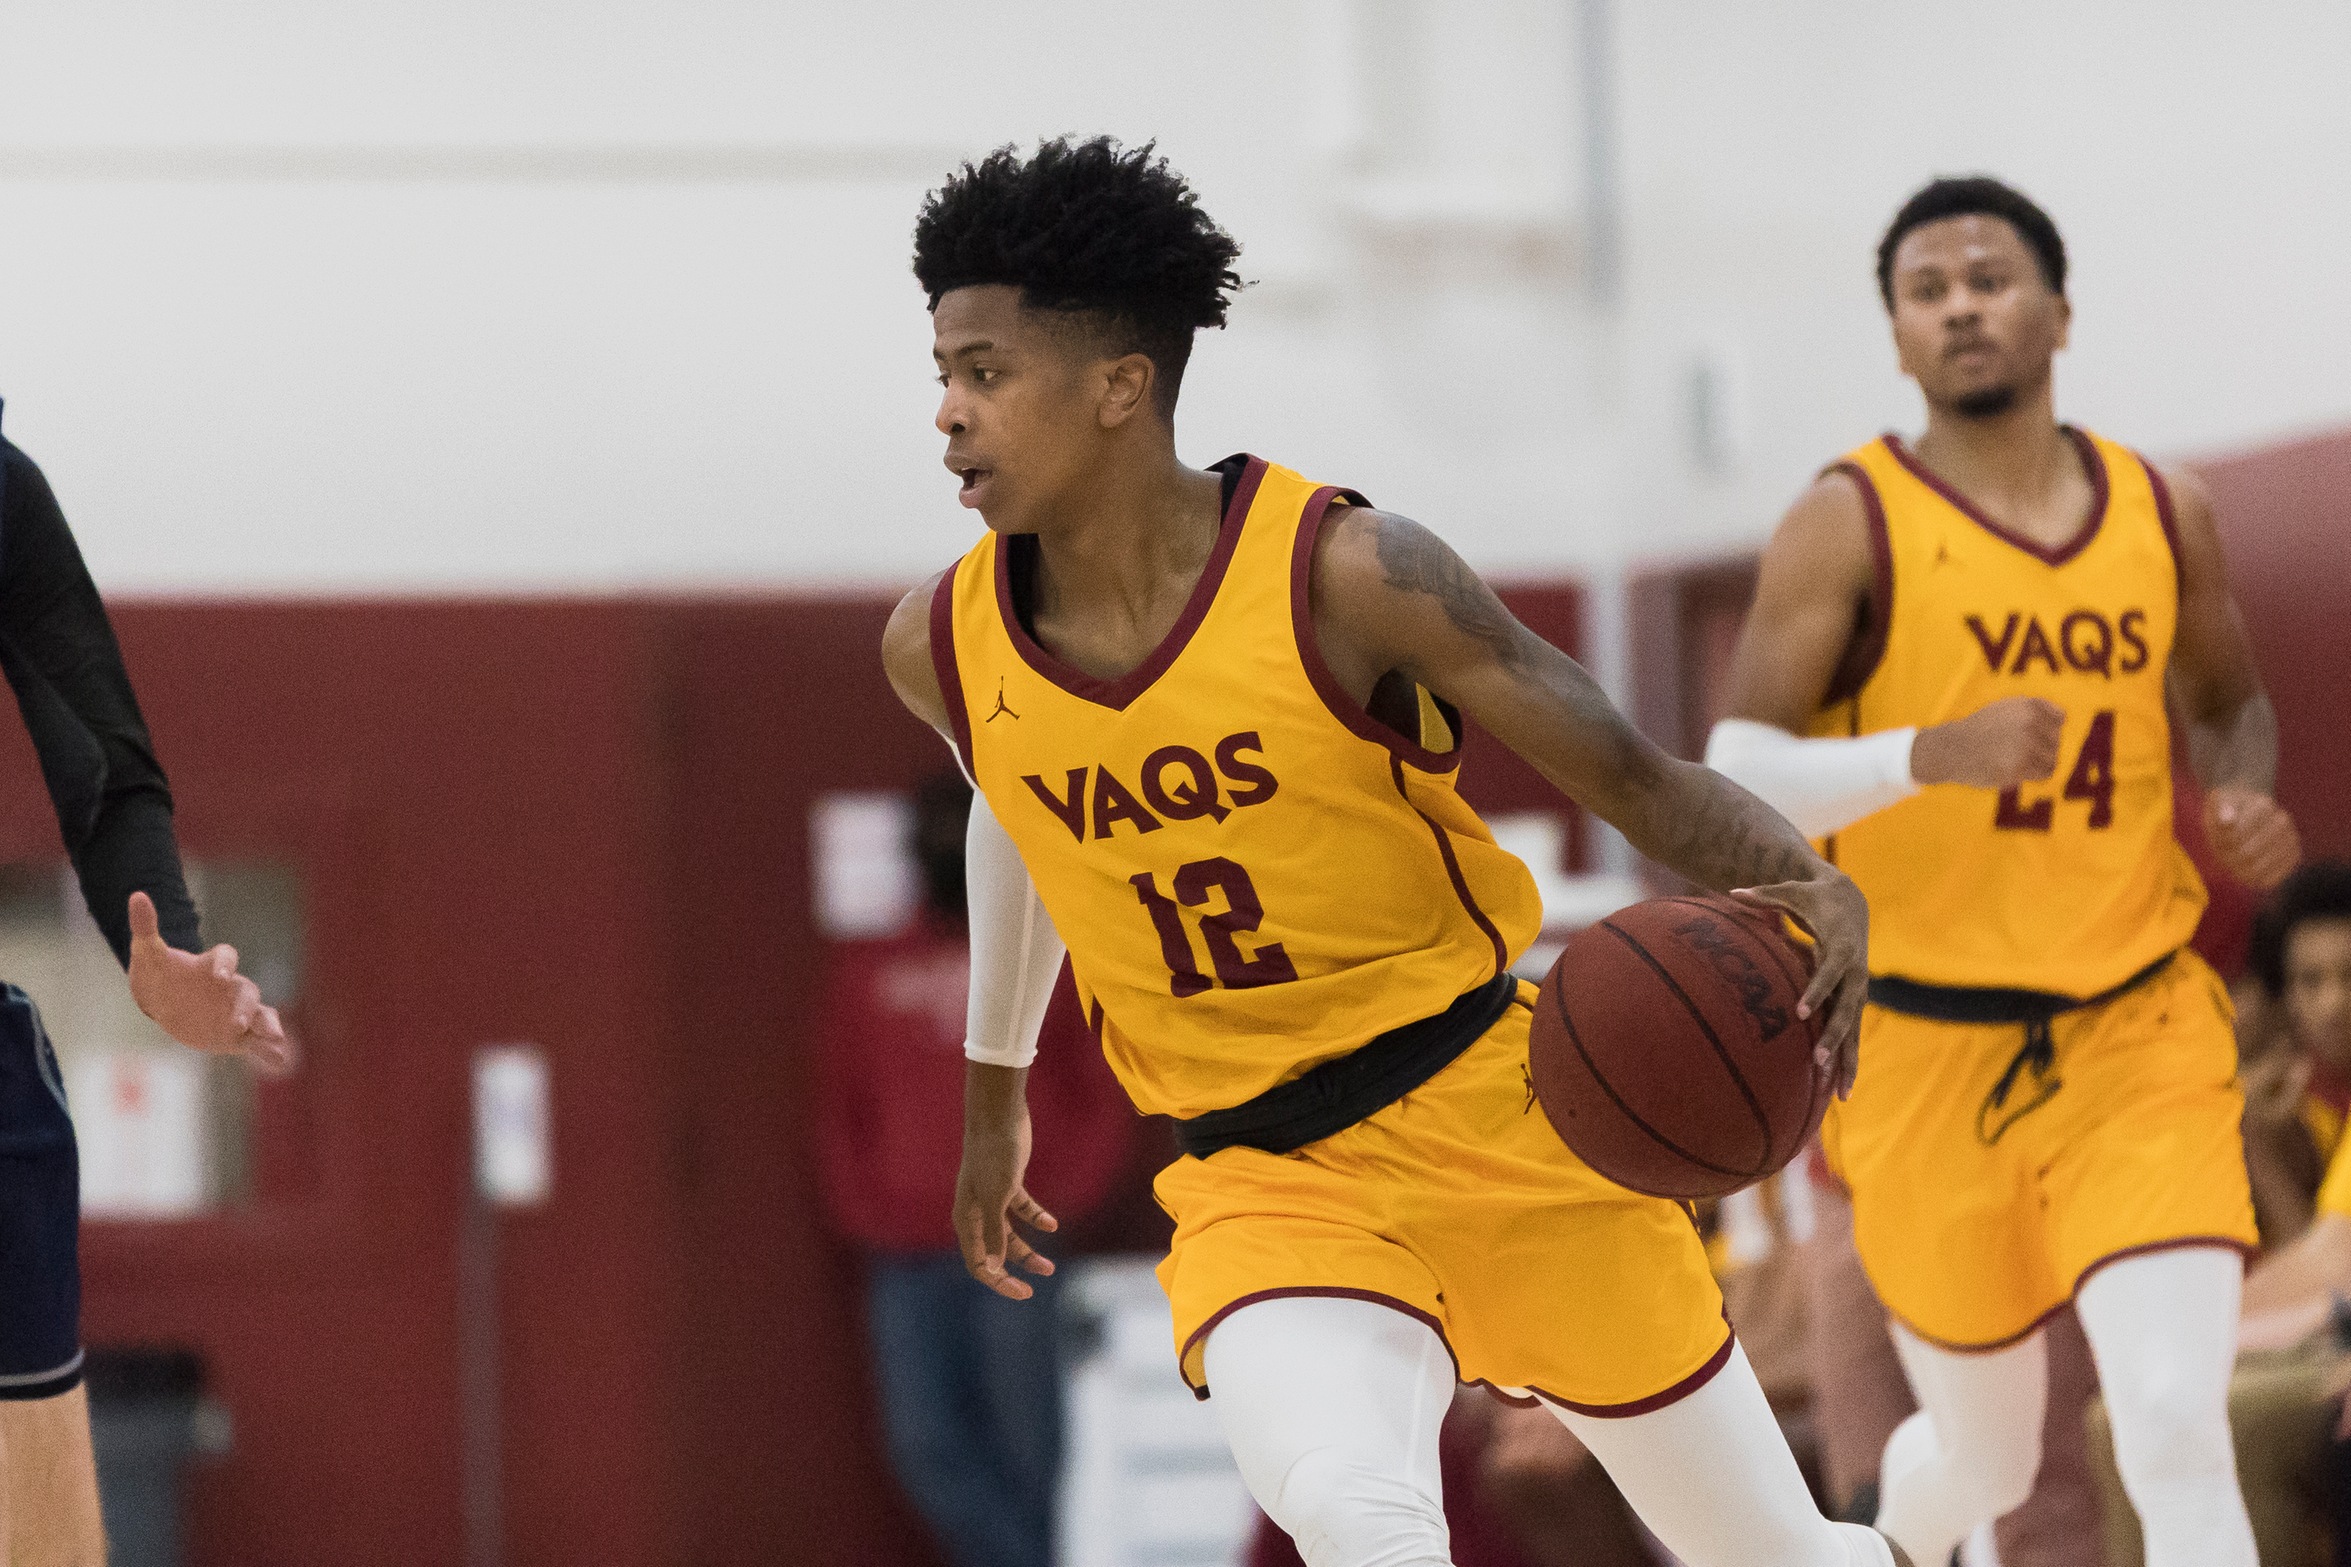 Glendale Men's Basketball gets the best of L.A. Valley, 72-66 Feb. 2